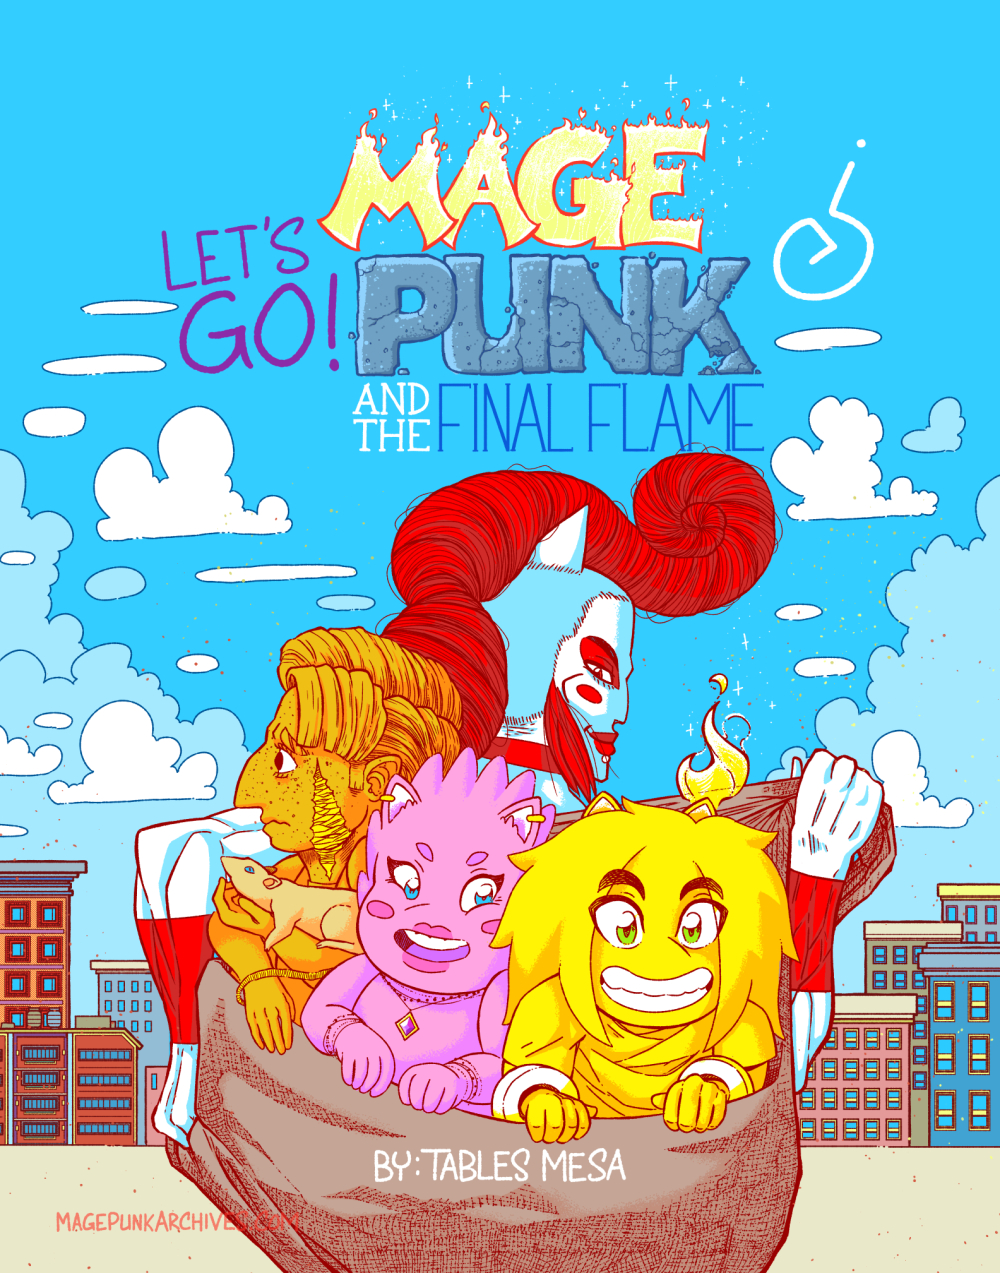 Mage Punk and the Final Flame! Let’s Go!-001